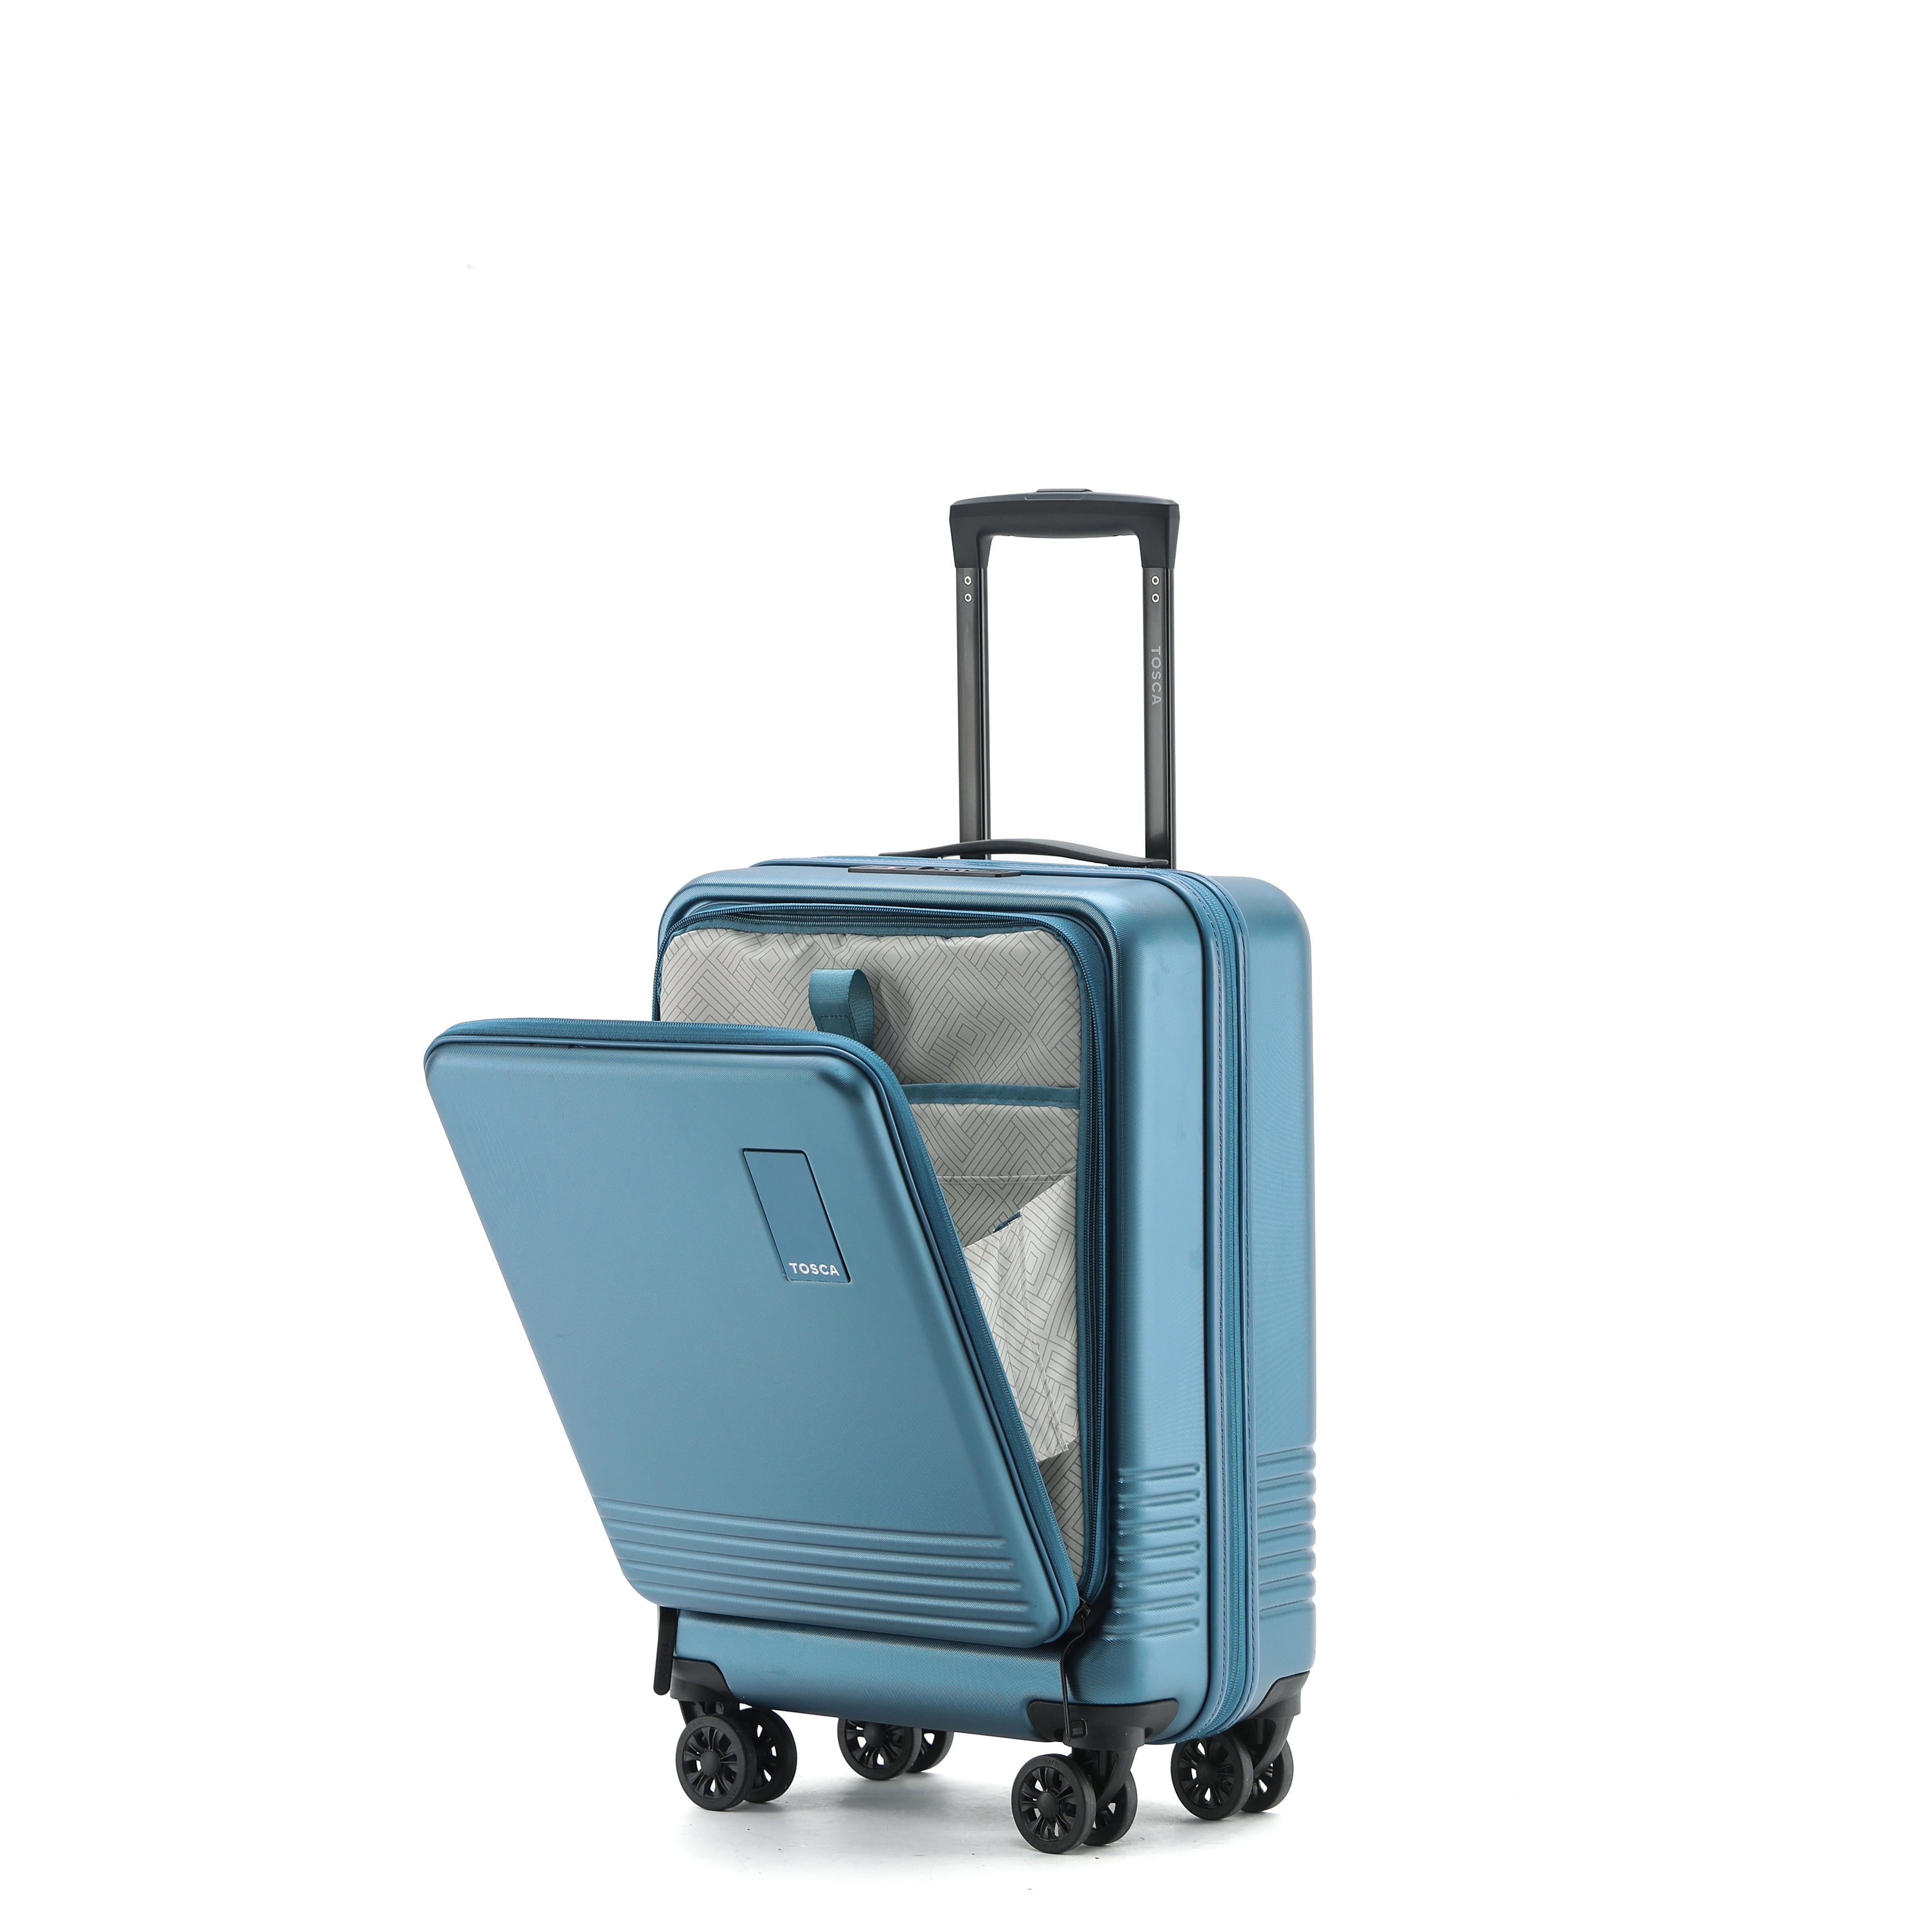 Tosca - TCA644 Horizon Front lid opening Set of 3 suitcases - Blue-10